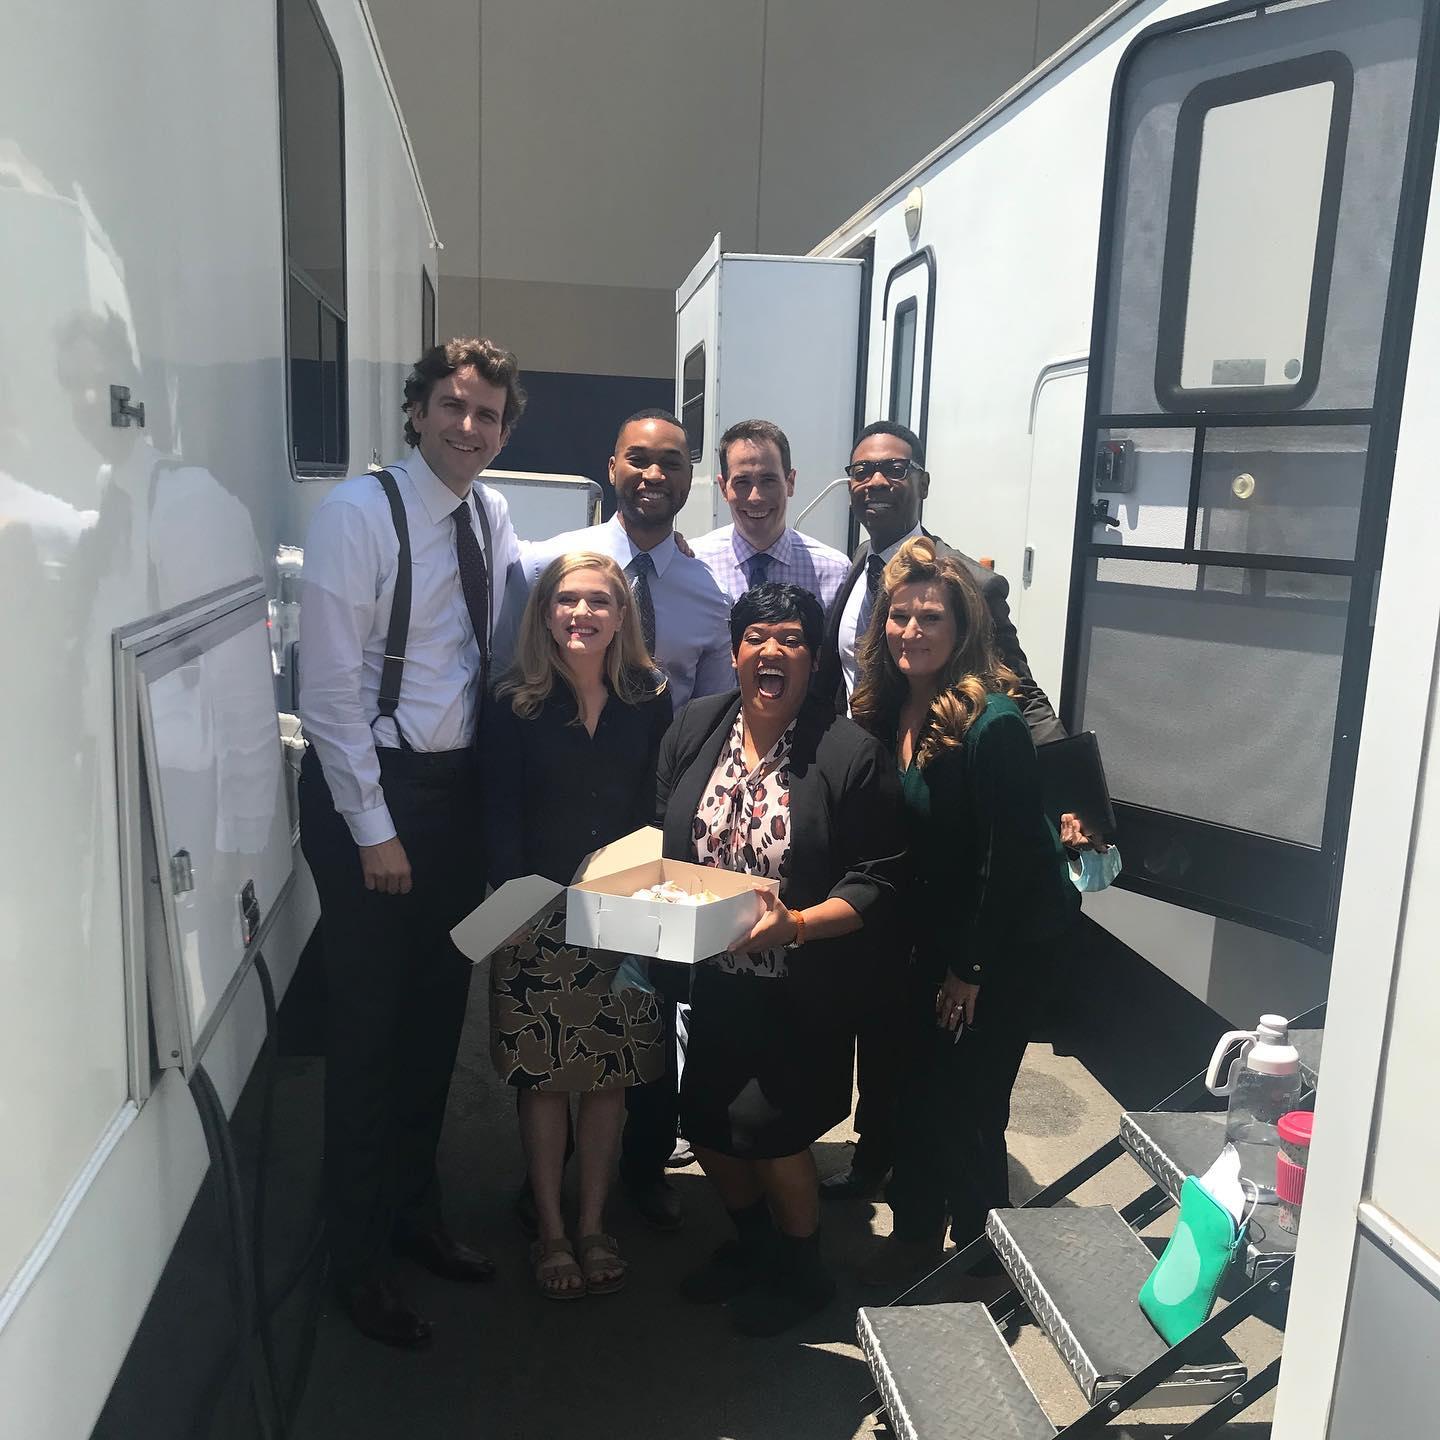 Ana Gasteyer and American Auto cast